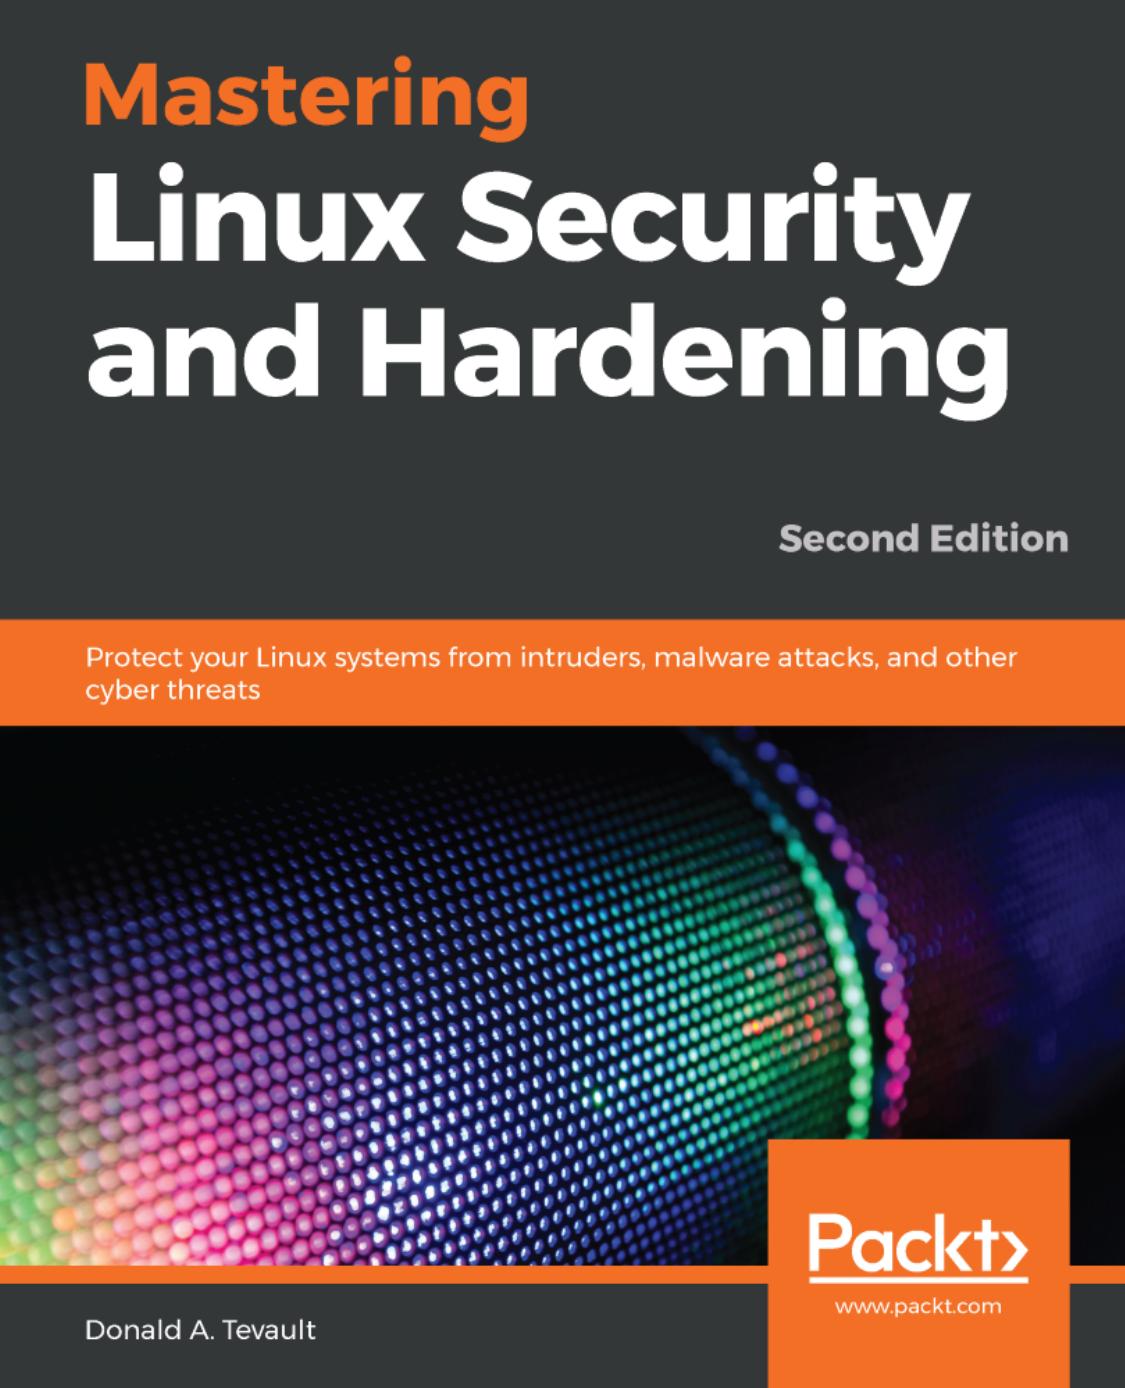 Mastering Linux Security and Hardening: Protect Your Linux Systems From Intruders, Malware Attacks, and Other Cyber Threats, 2nd Edition